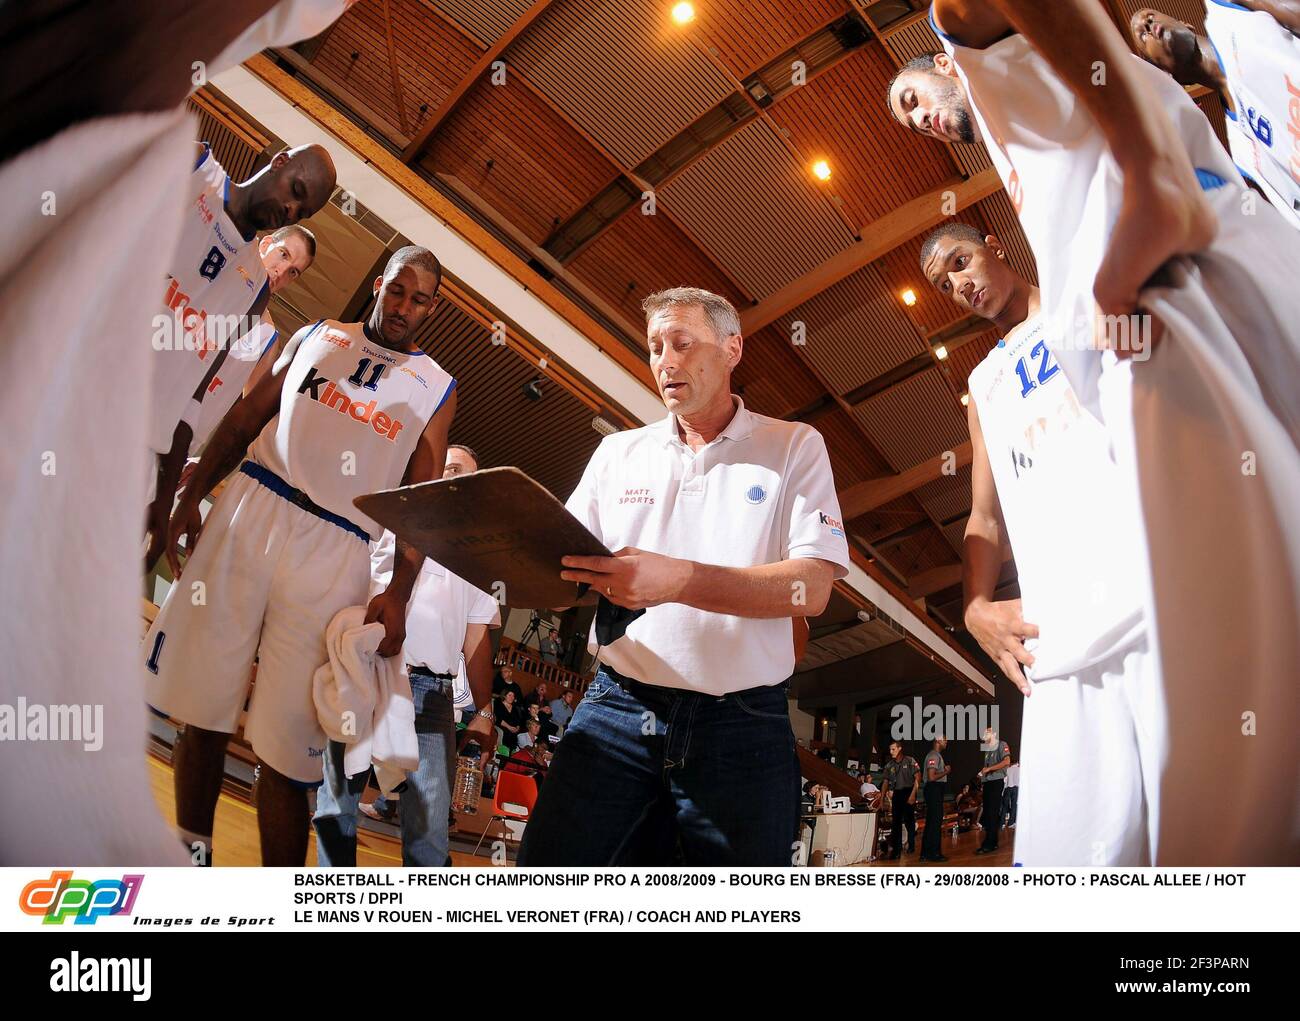 BASKETBALL - FRENCH CHAMPIONSHIP PRO A 2008/2009 - BOURG EN BRESSE (FRA) -  29/08/2008 - PHOTO : PASCAL ALLEE / HOT SPORTS / DPPI LE MANS V ROUEN -  MICHEL VERONET (FRA) / COACH AND PLAYERS Stock Photo - Alamy